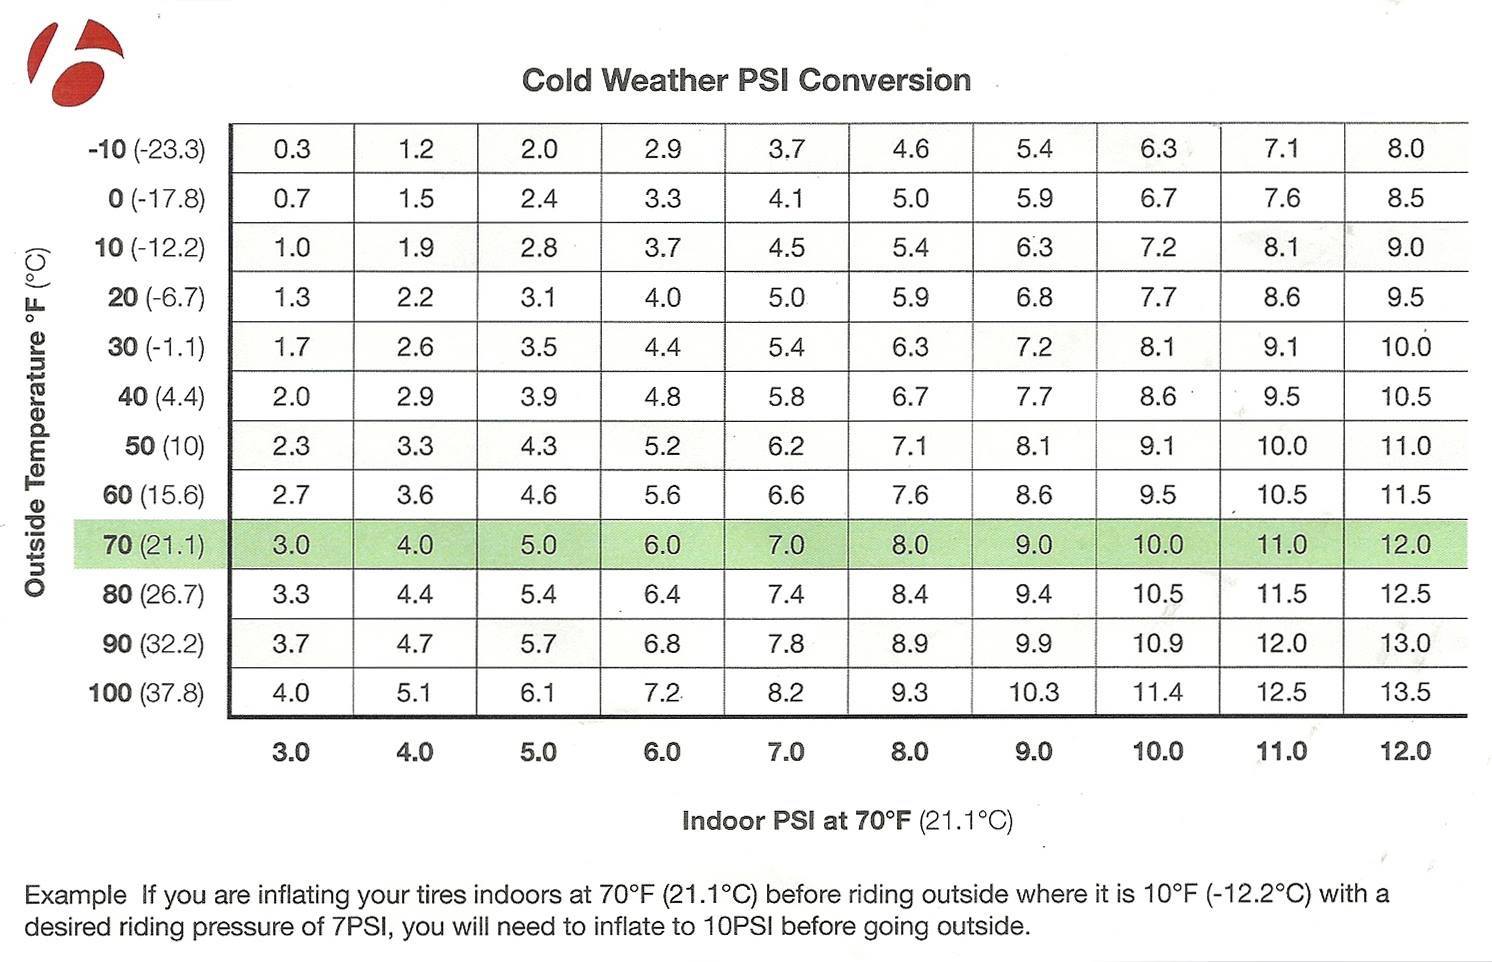 Indoor to outdoor pressure conversion table for fatbike tire pressures